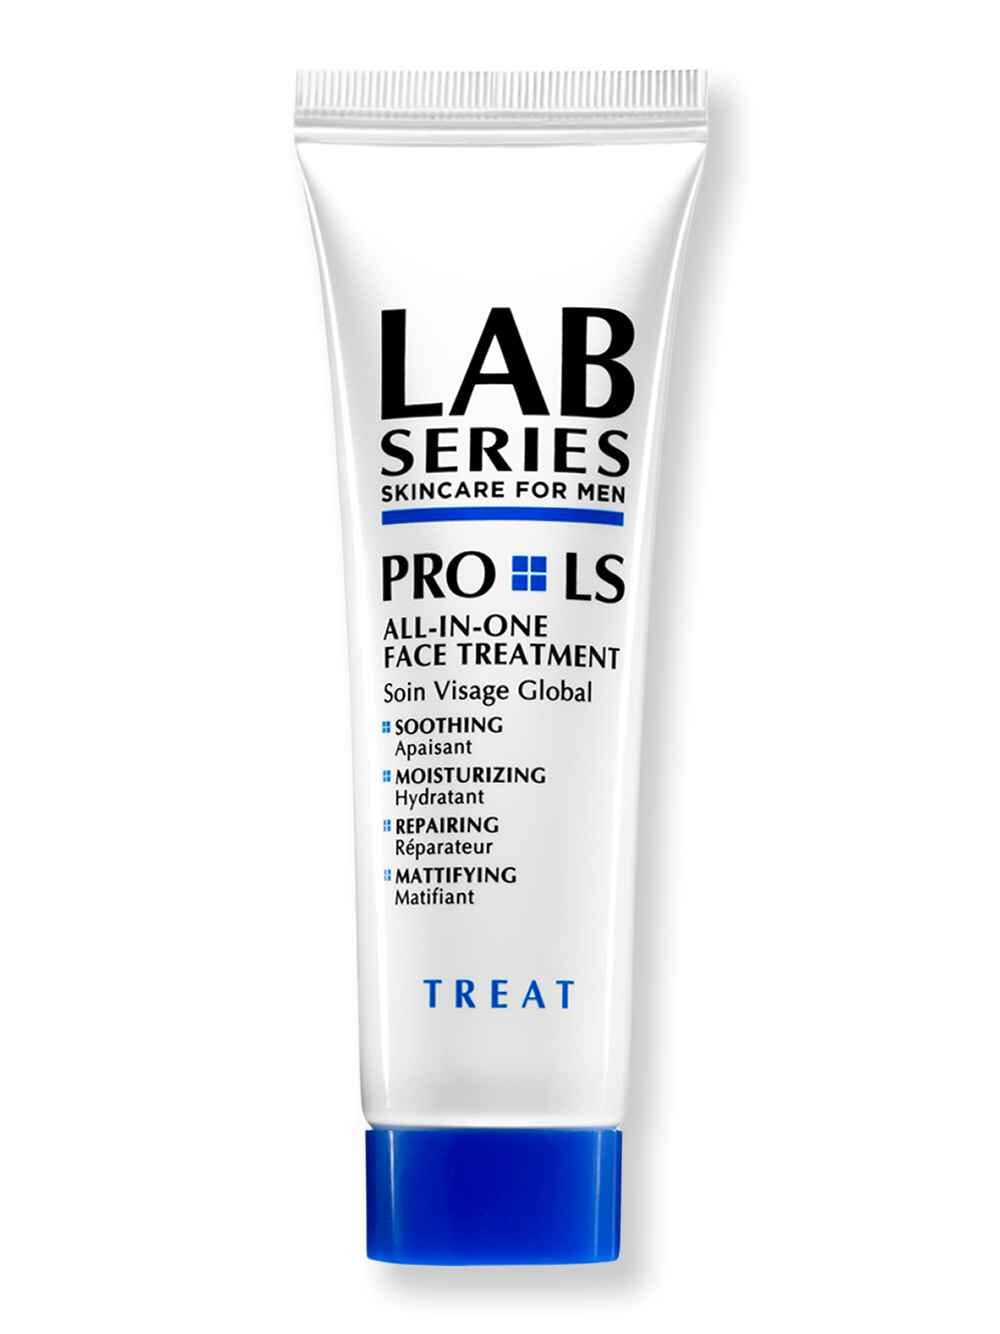 Lab Series Lab Series Pro LS All in One Face Treatment 0.67 oz Skin Care Treatments 